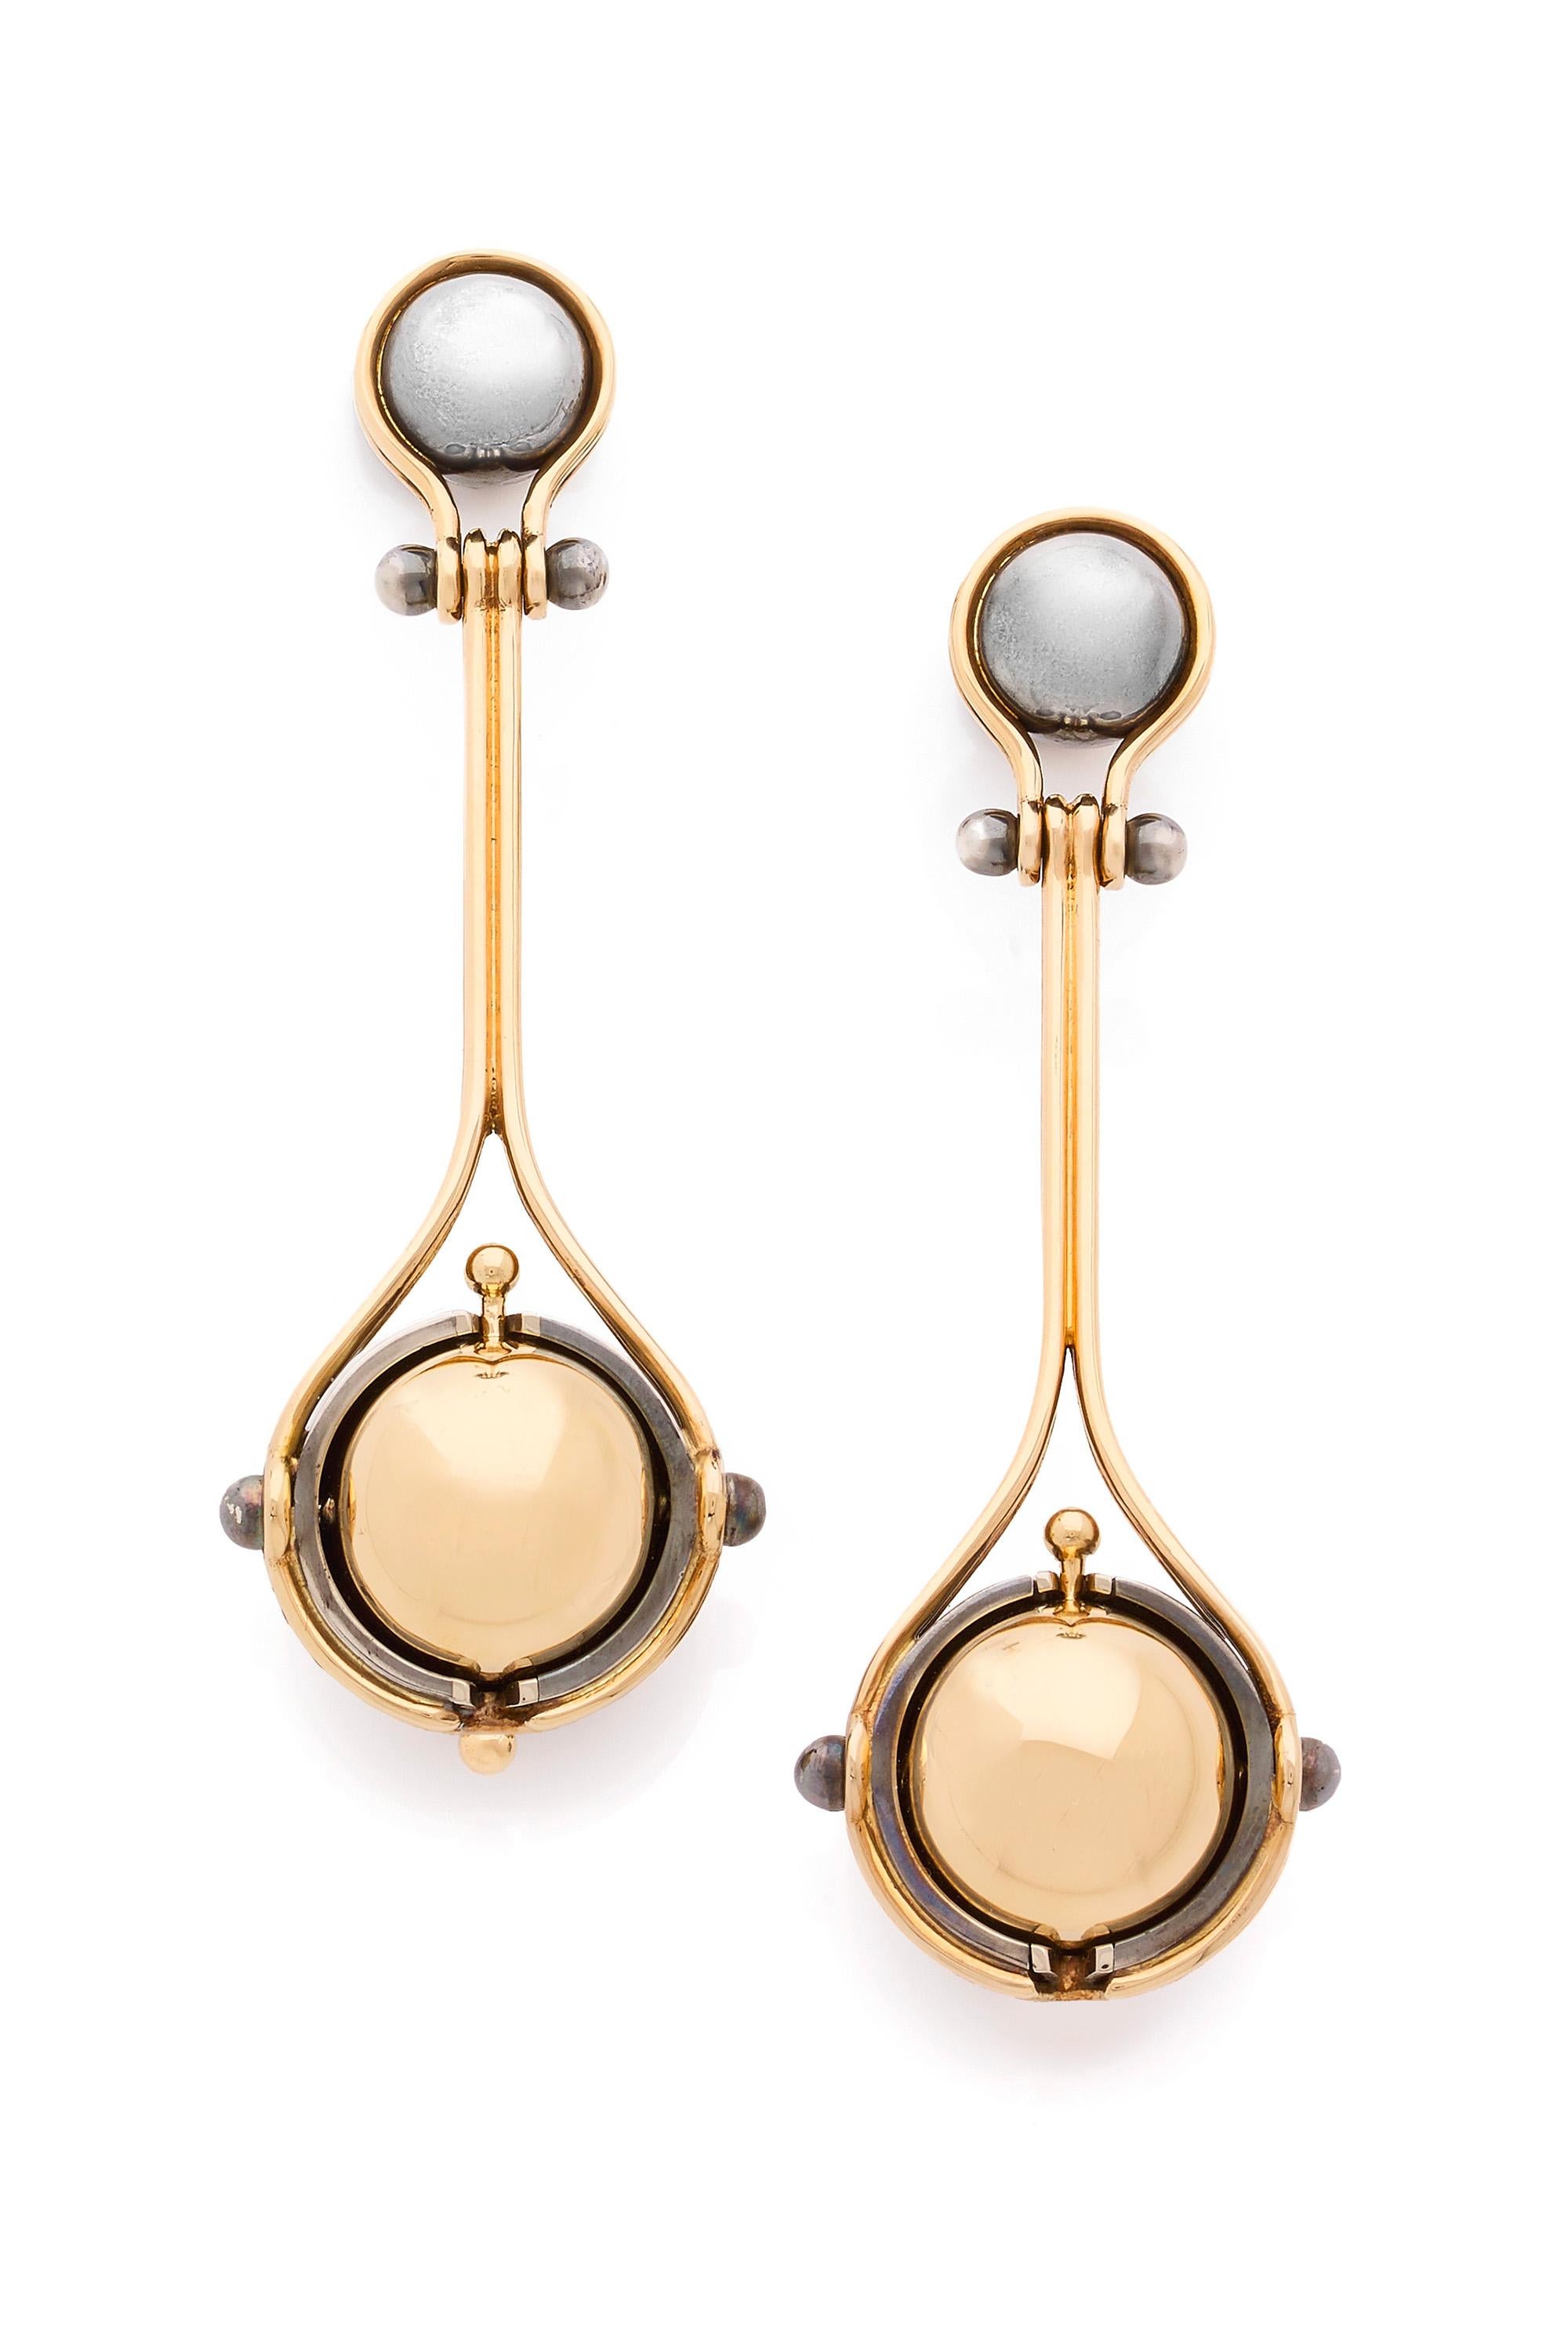 Neoclassical Long Akoya Pearls & Diamond Pluton Earrings in 18k Yellow Gold by Elie Top For Sale